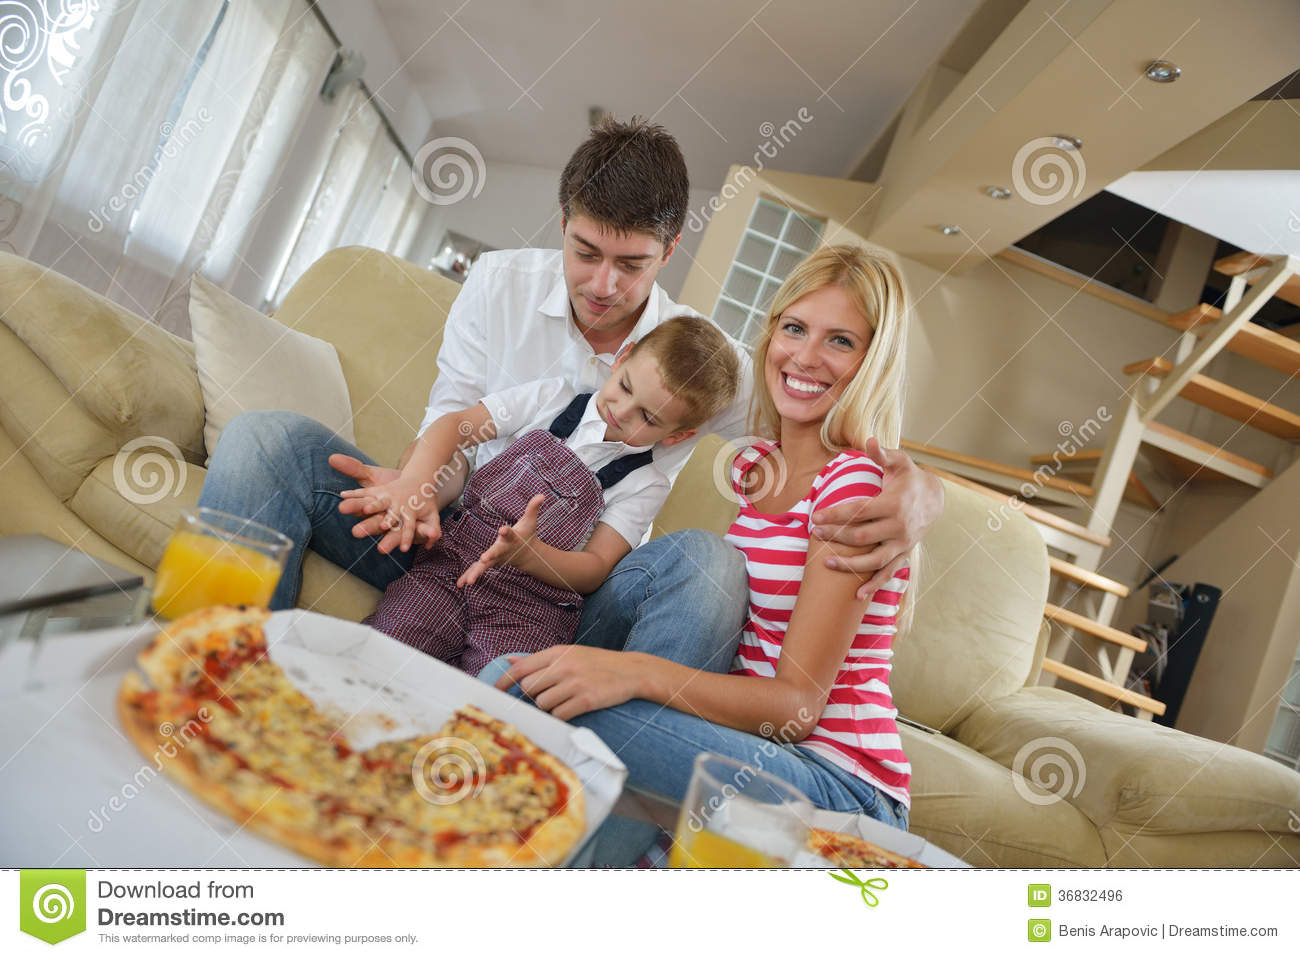 Happy Young Family Eating Tasty Pizza With Cheesa And Dring Healthy